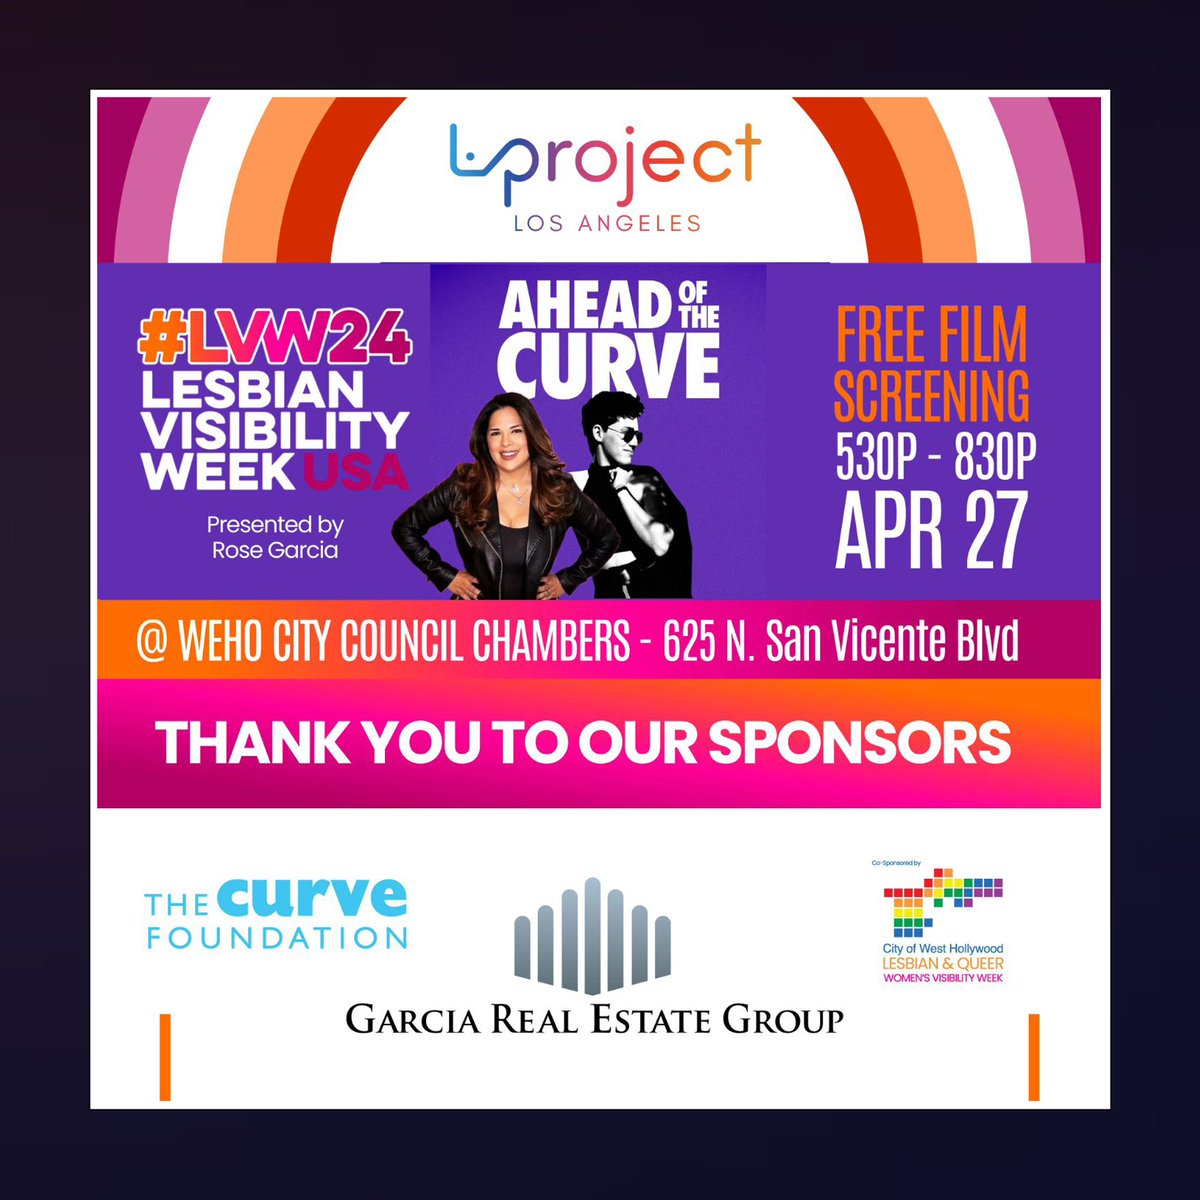 The L Project LA has partnered w/ @CurveFdn to bring you a FREE screening of 'AHEAD OF THE CURVE,' co-sponsored by the @WeHoCity's Lesbian & Queer Women's Visibility Week. The screening will be held on April 27th, 5:30-8:30 PM - get your tickets! 👉 bit.ly/curveweho #LVW24